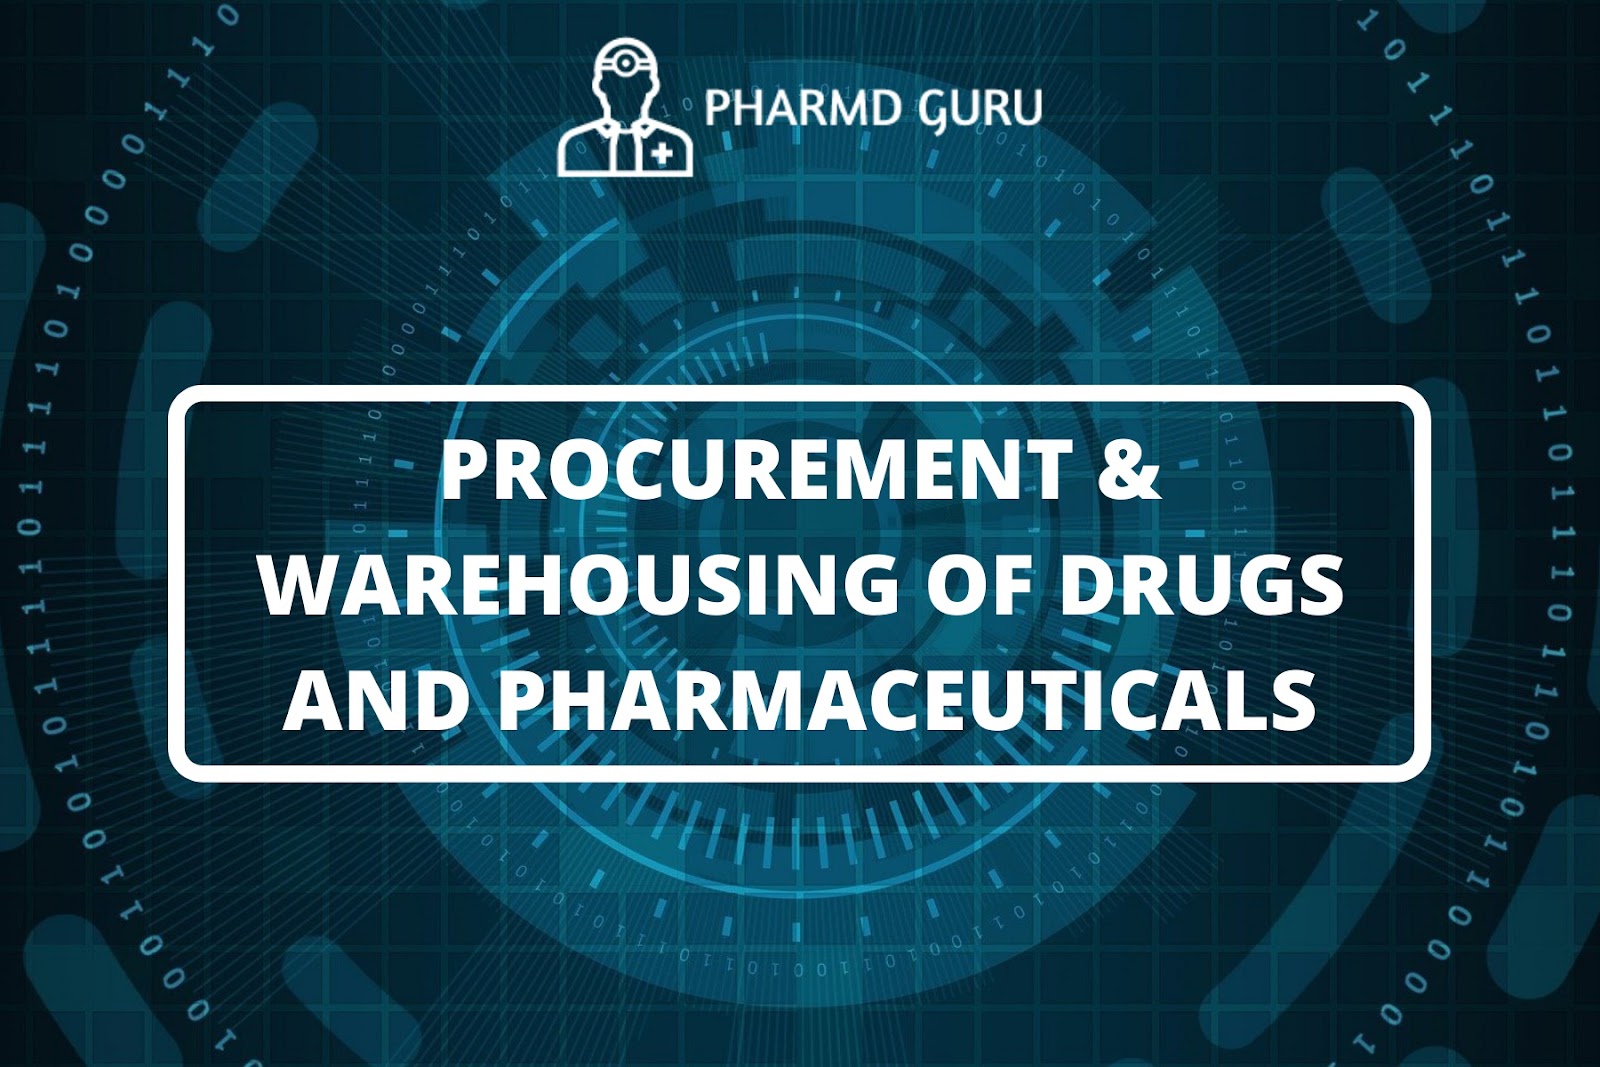 12. PROCUREMENT & WAREHOUSING OF DRUGS AND PHARMACEUTICALS